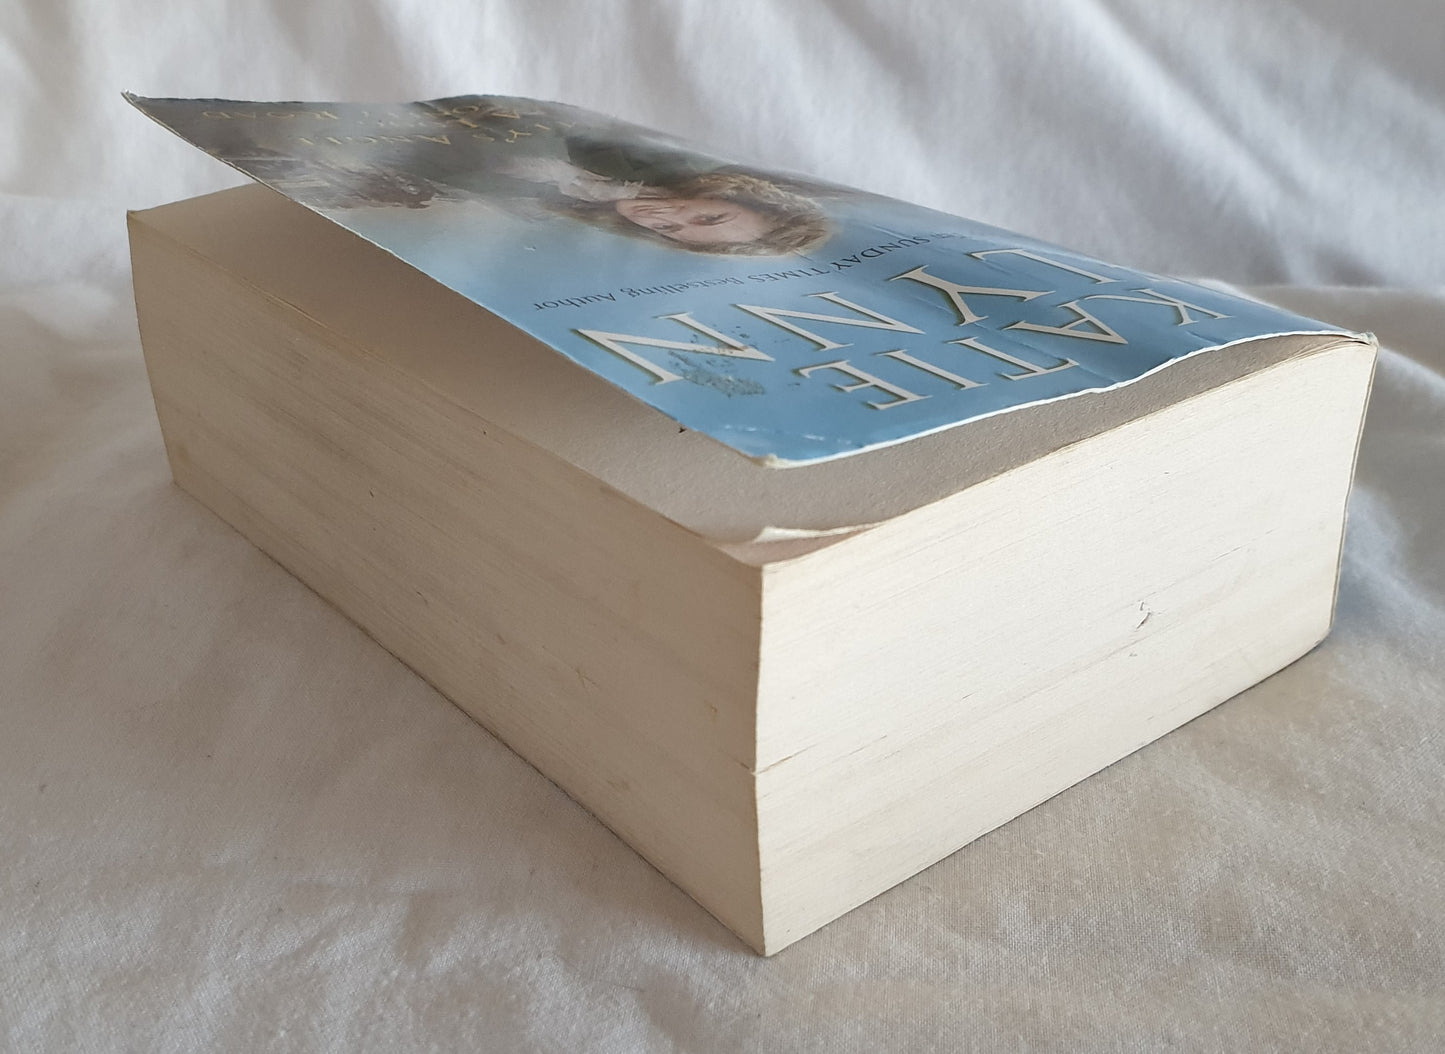 Polly's Angel | A Long and Lonely Road by Katie Flynn